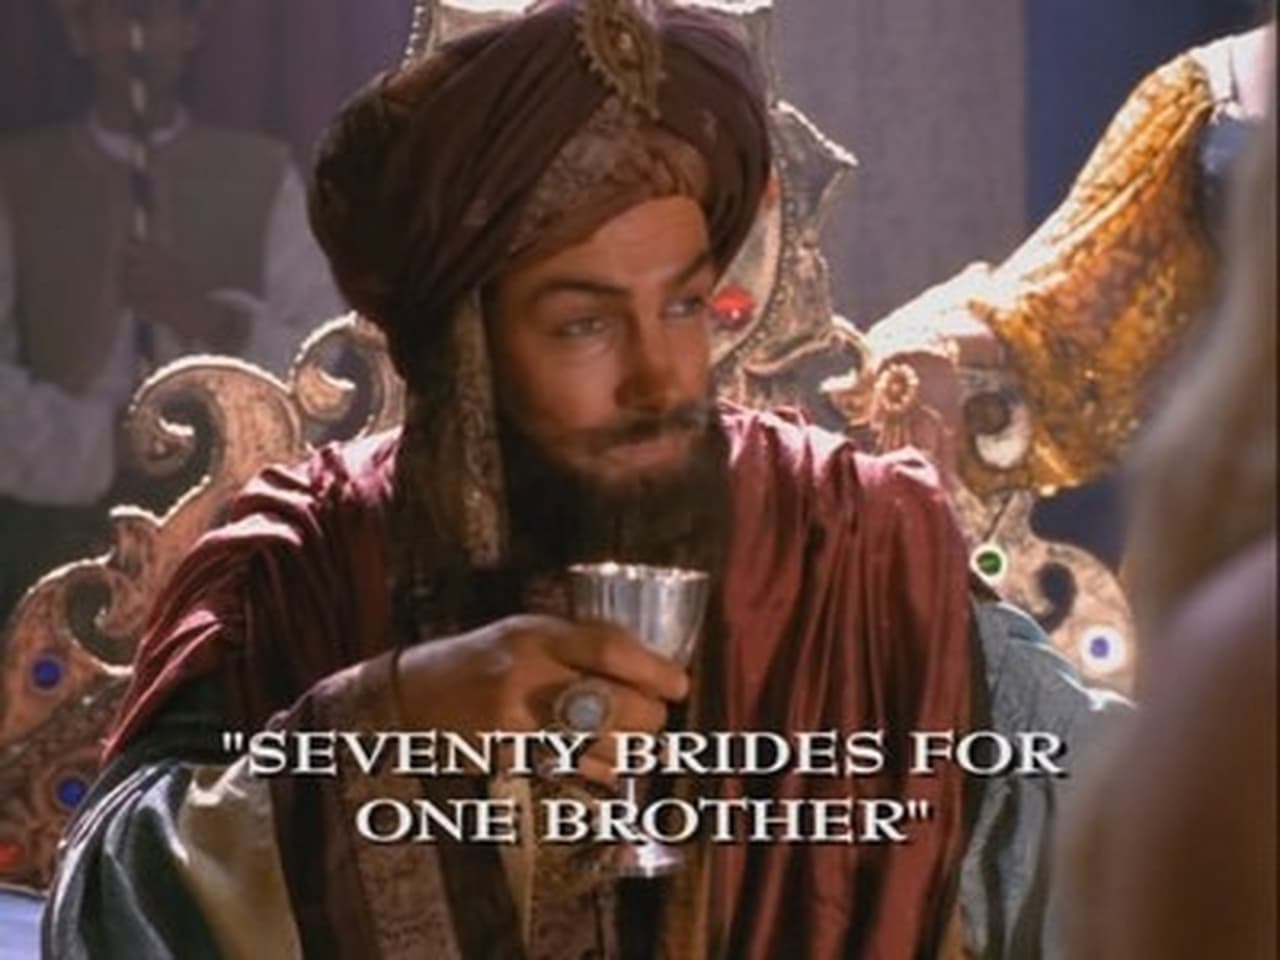 Seventy Brides For One Brother